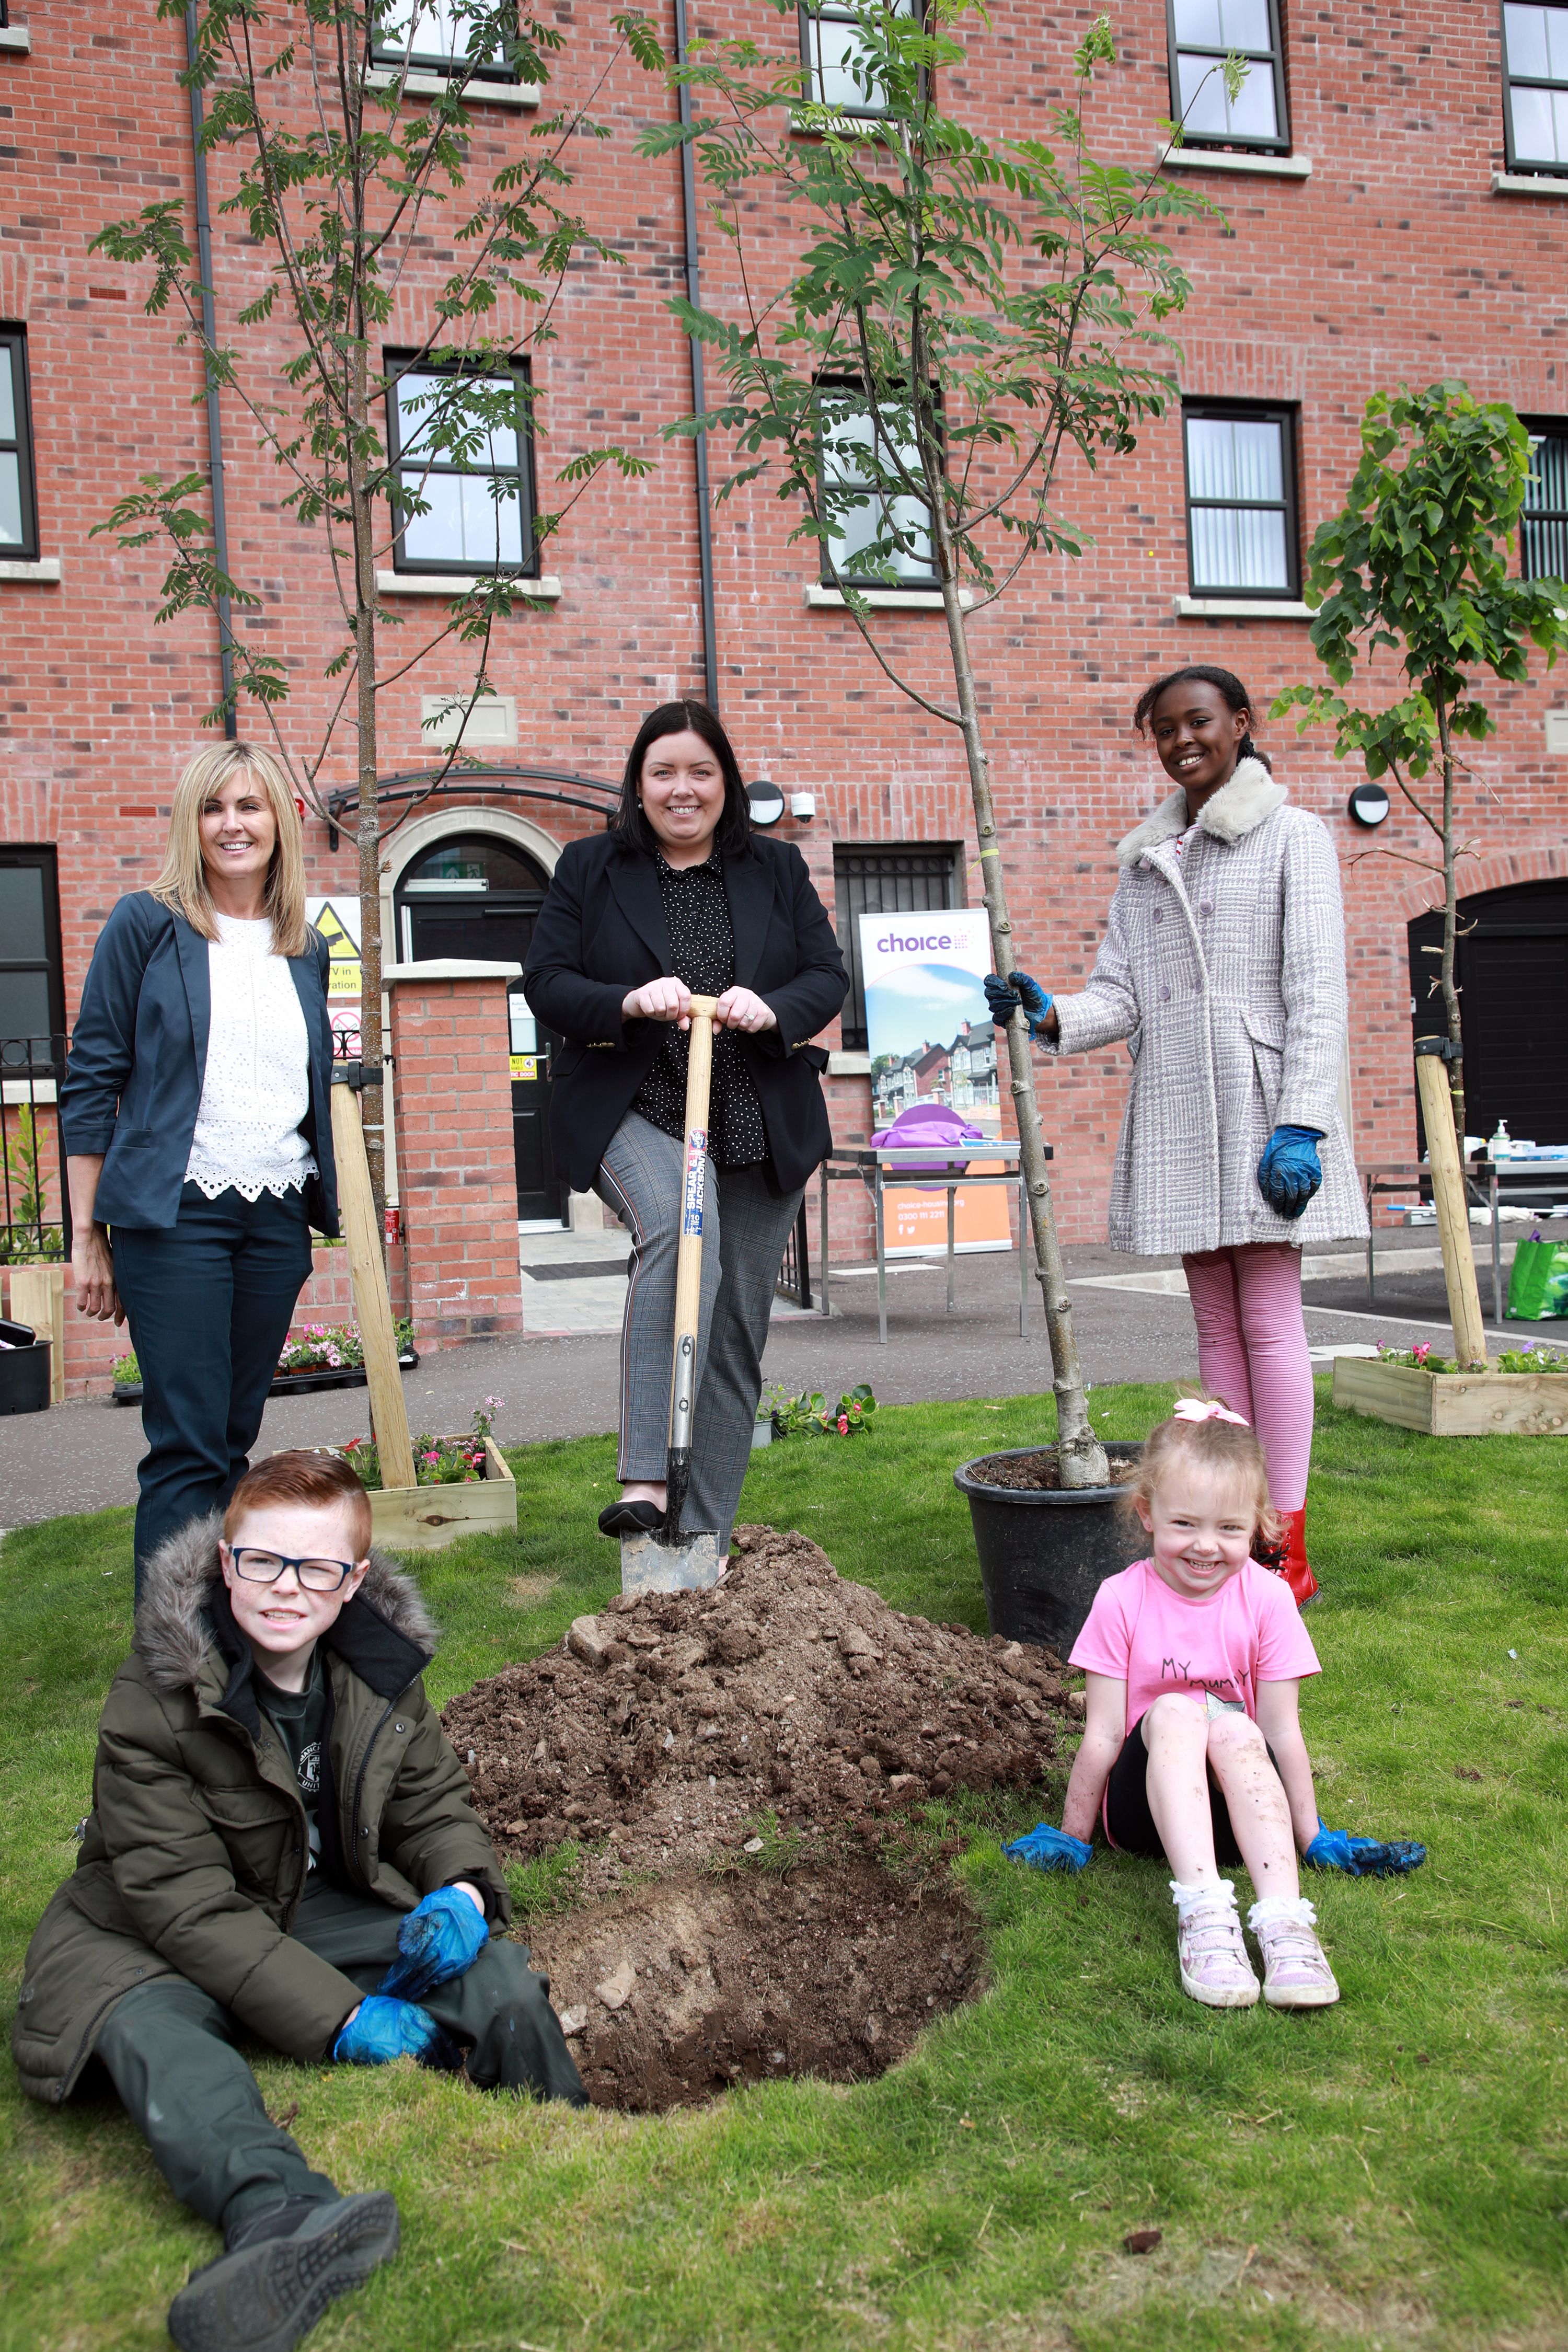 GREEN FINGERS: Carole Irvine from Choice Housing, Minister for Communities Deirdre Hargey, with local children Hayaam Mahamuud, Meabh and Aodhan Conlon.